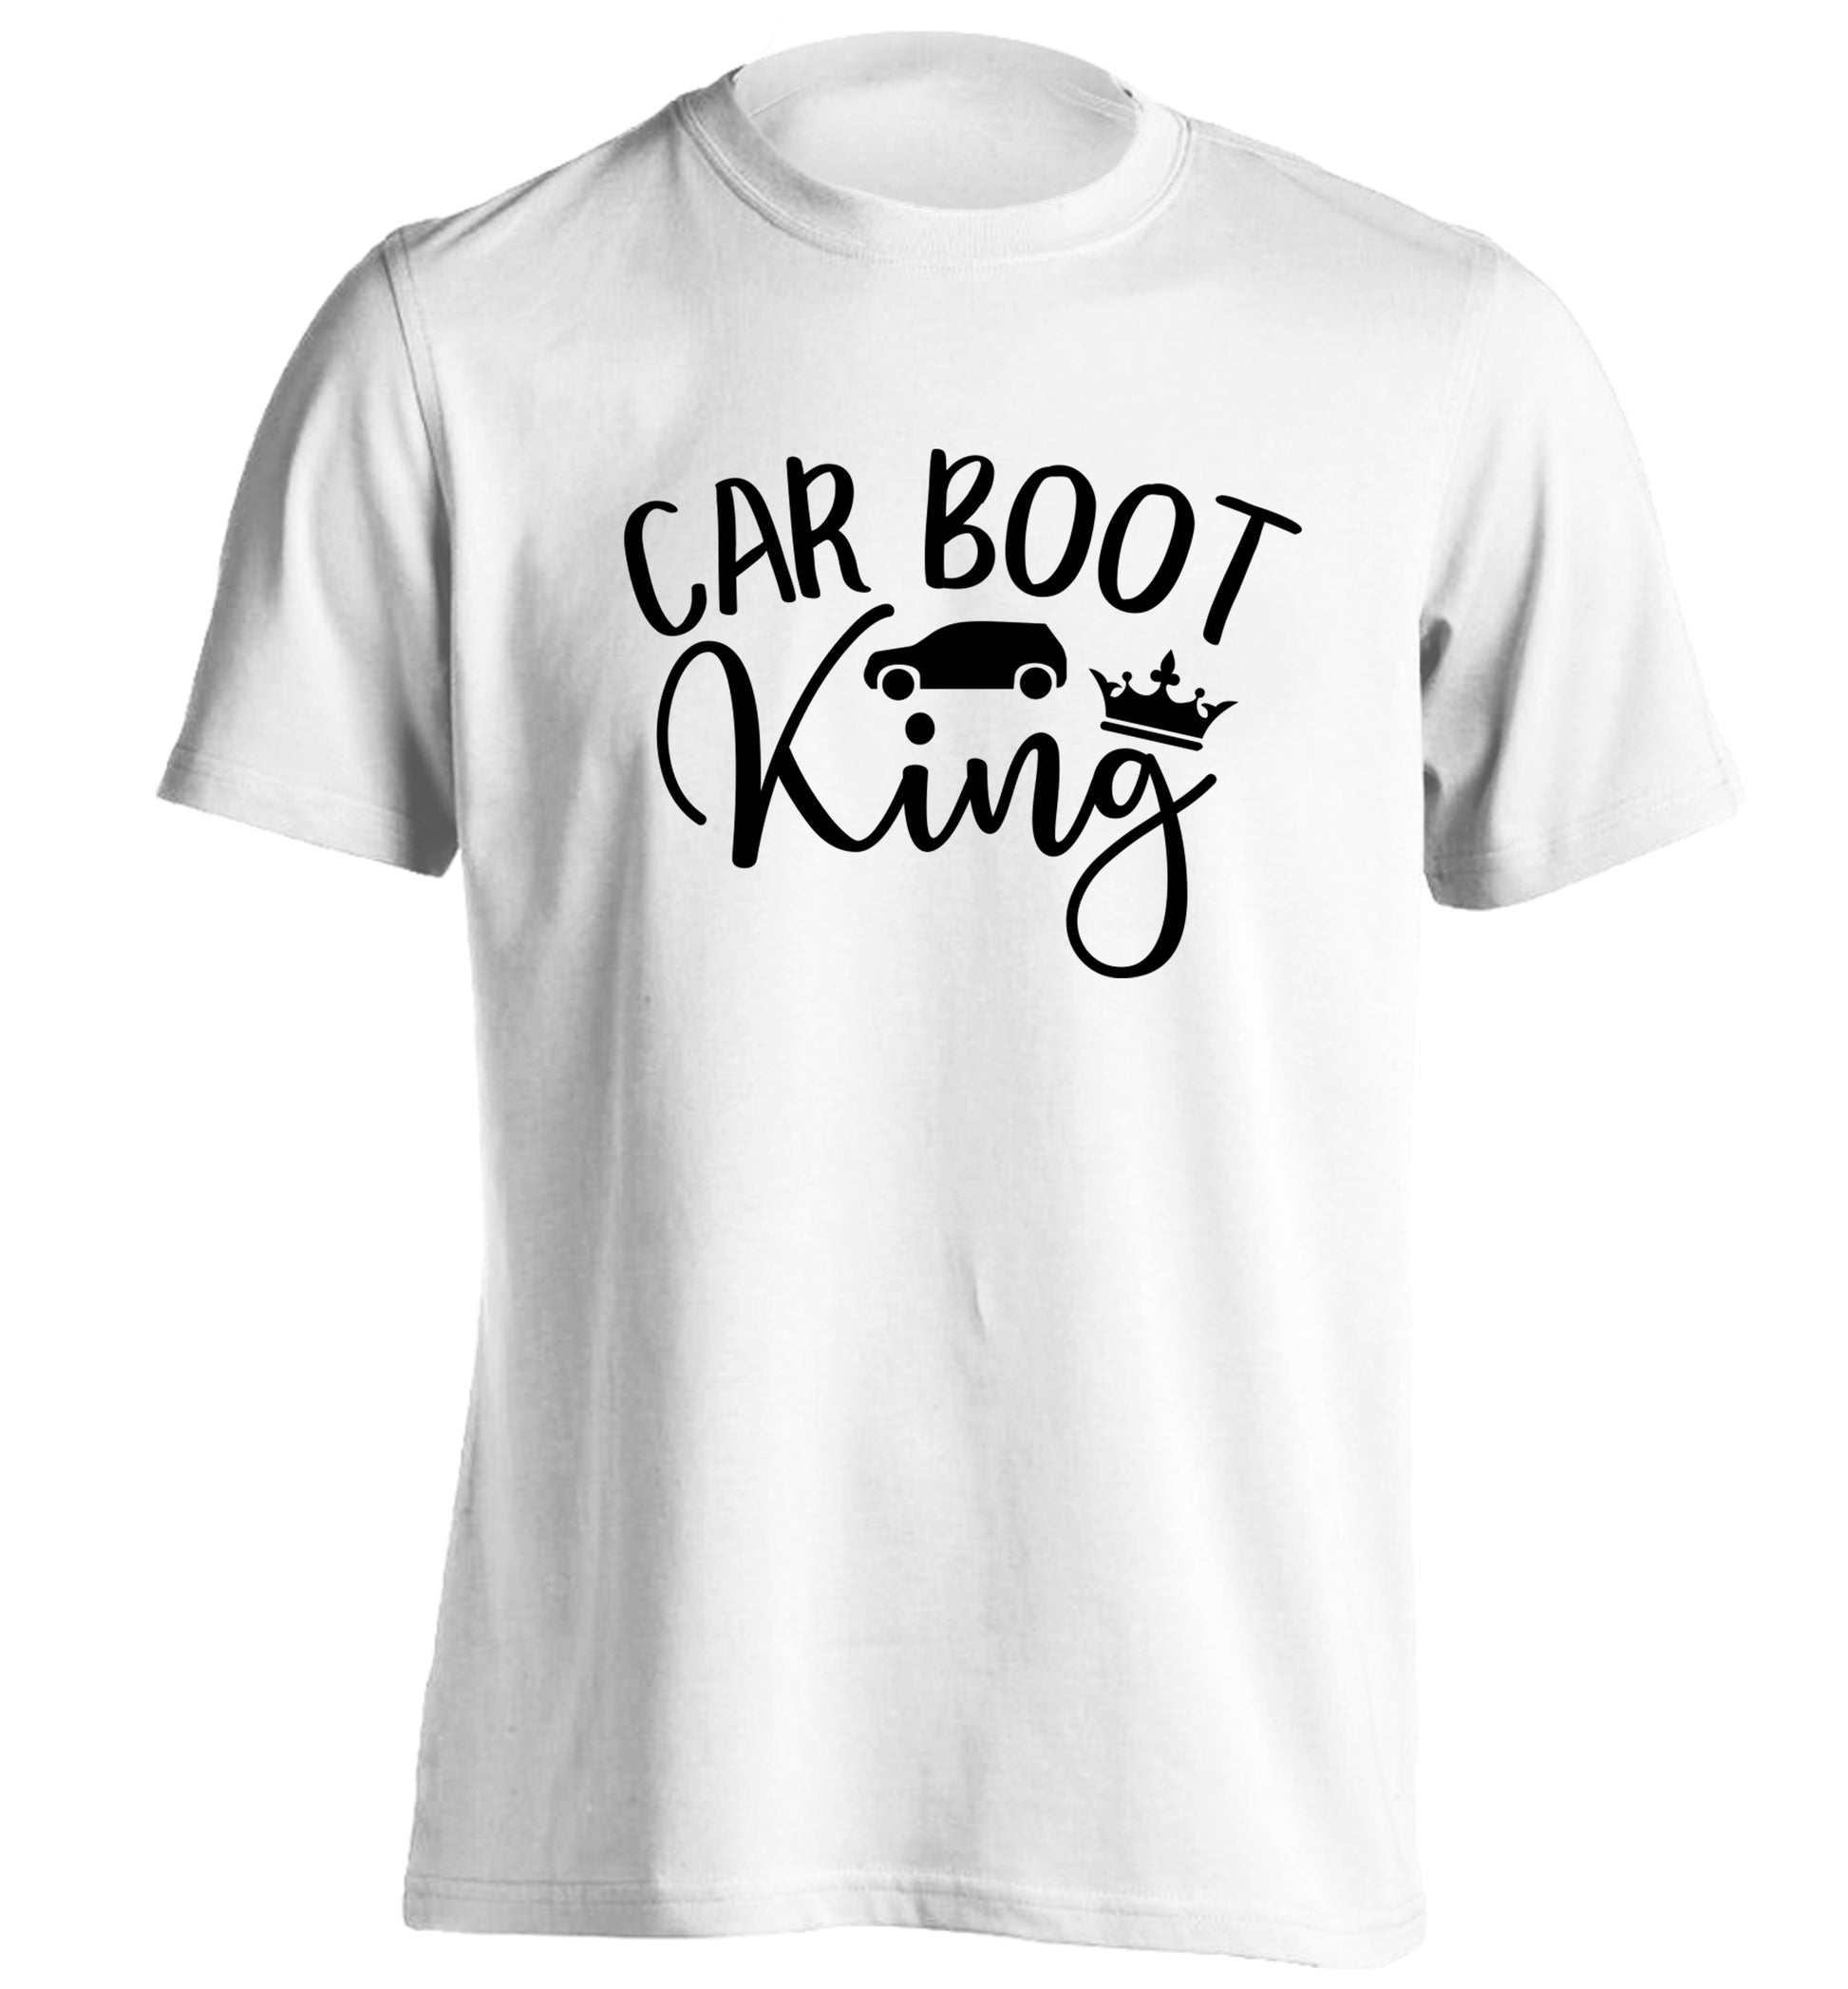 Carboot King adults unisex white Tshirt 2XL